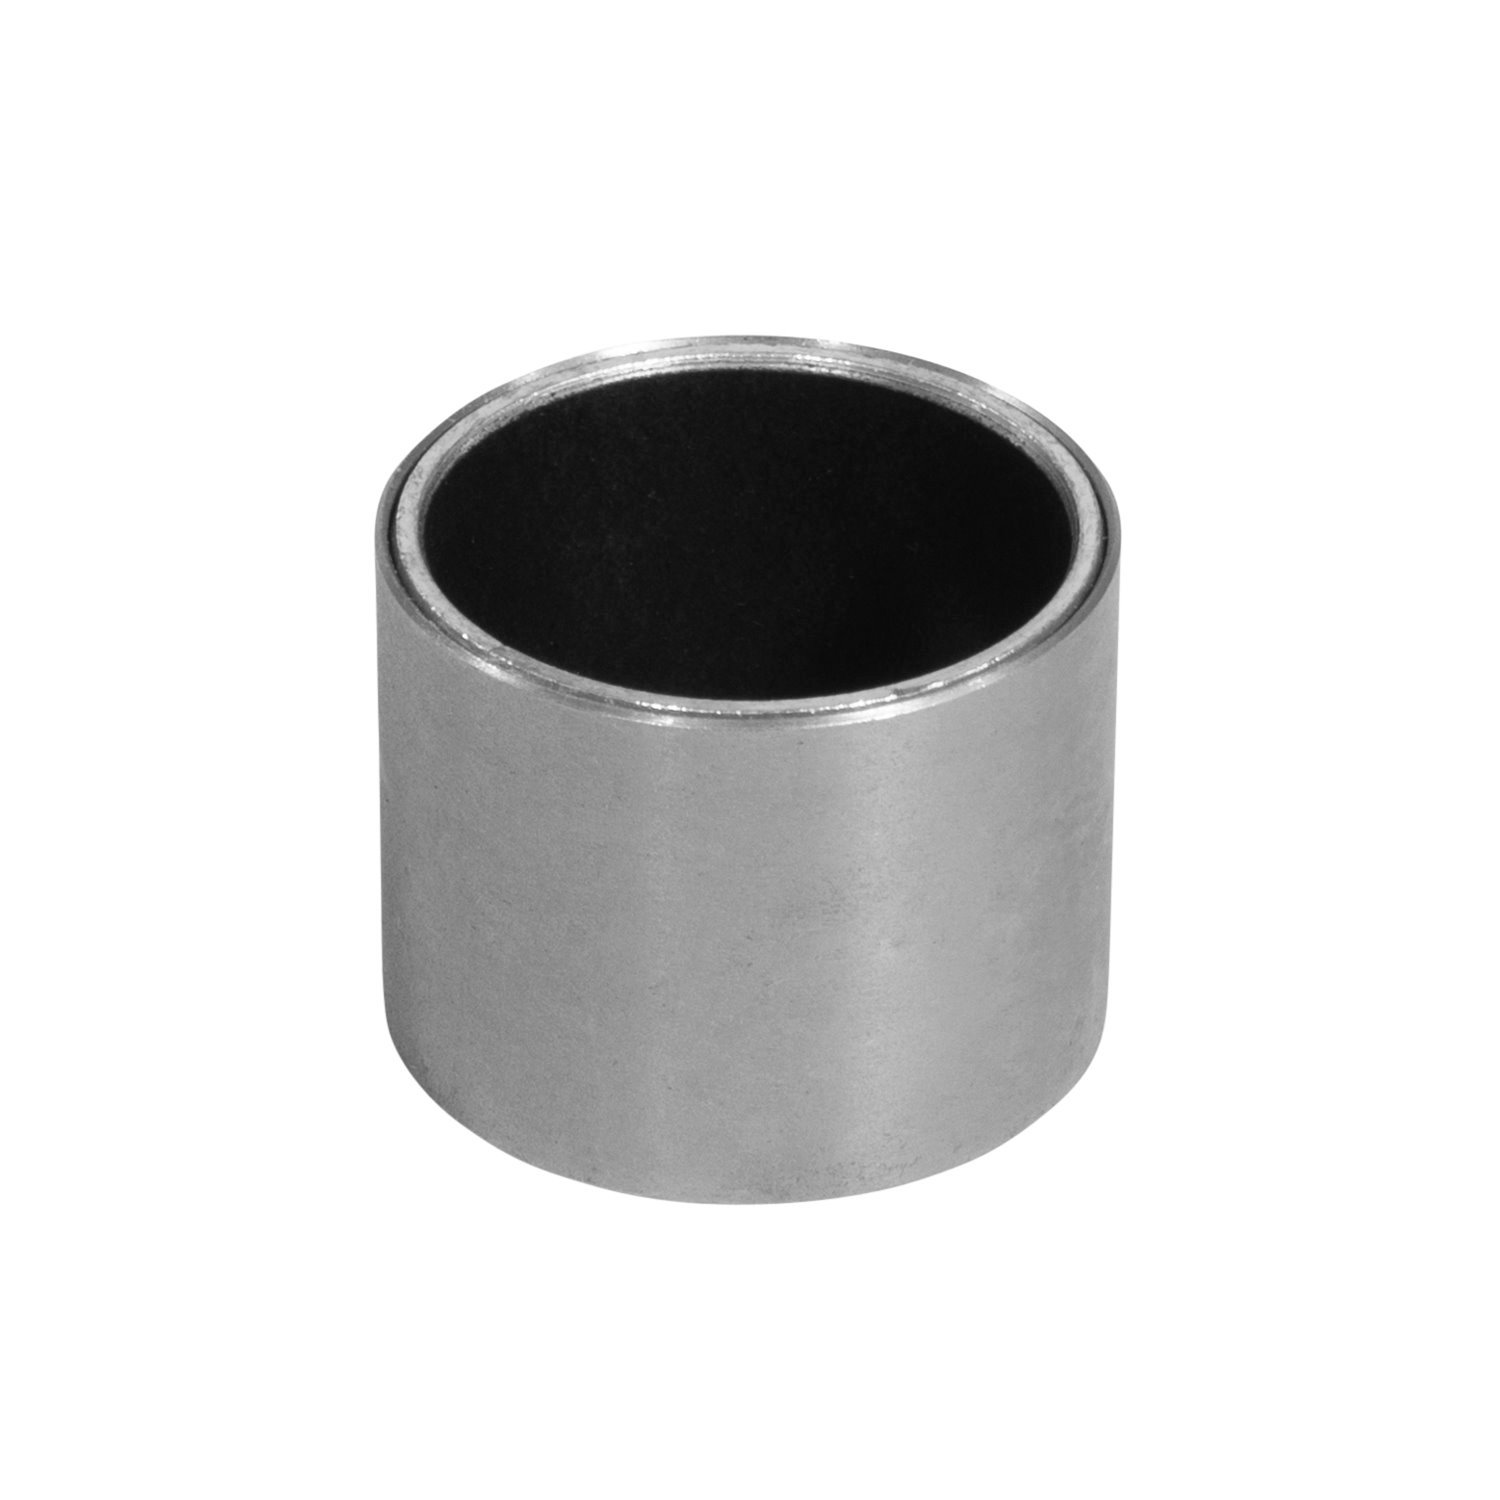 Cv Axle Bushing For Front Toyota 8 in. With Clamshell Design